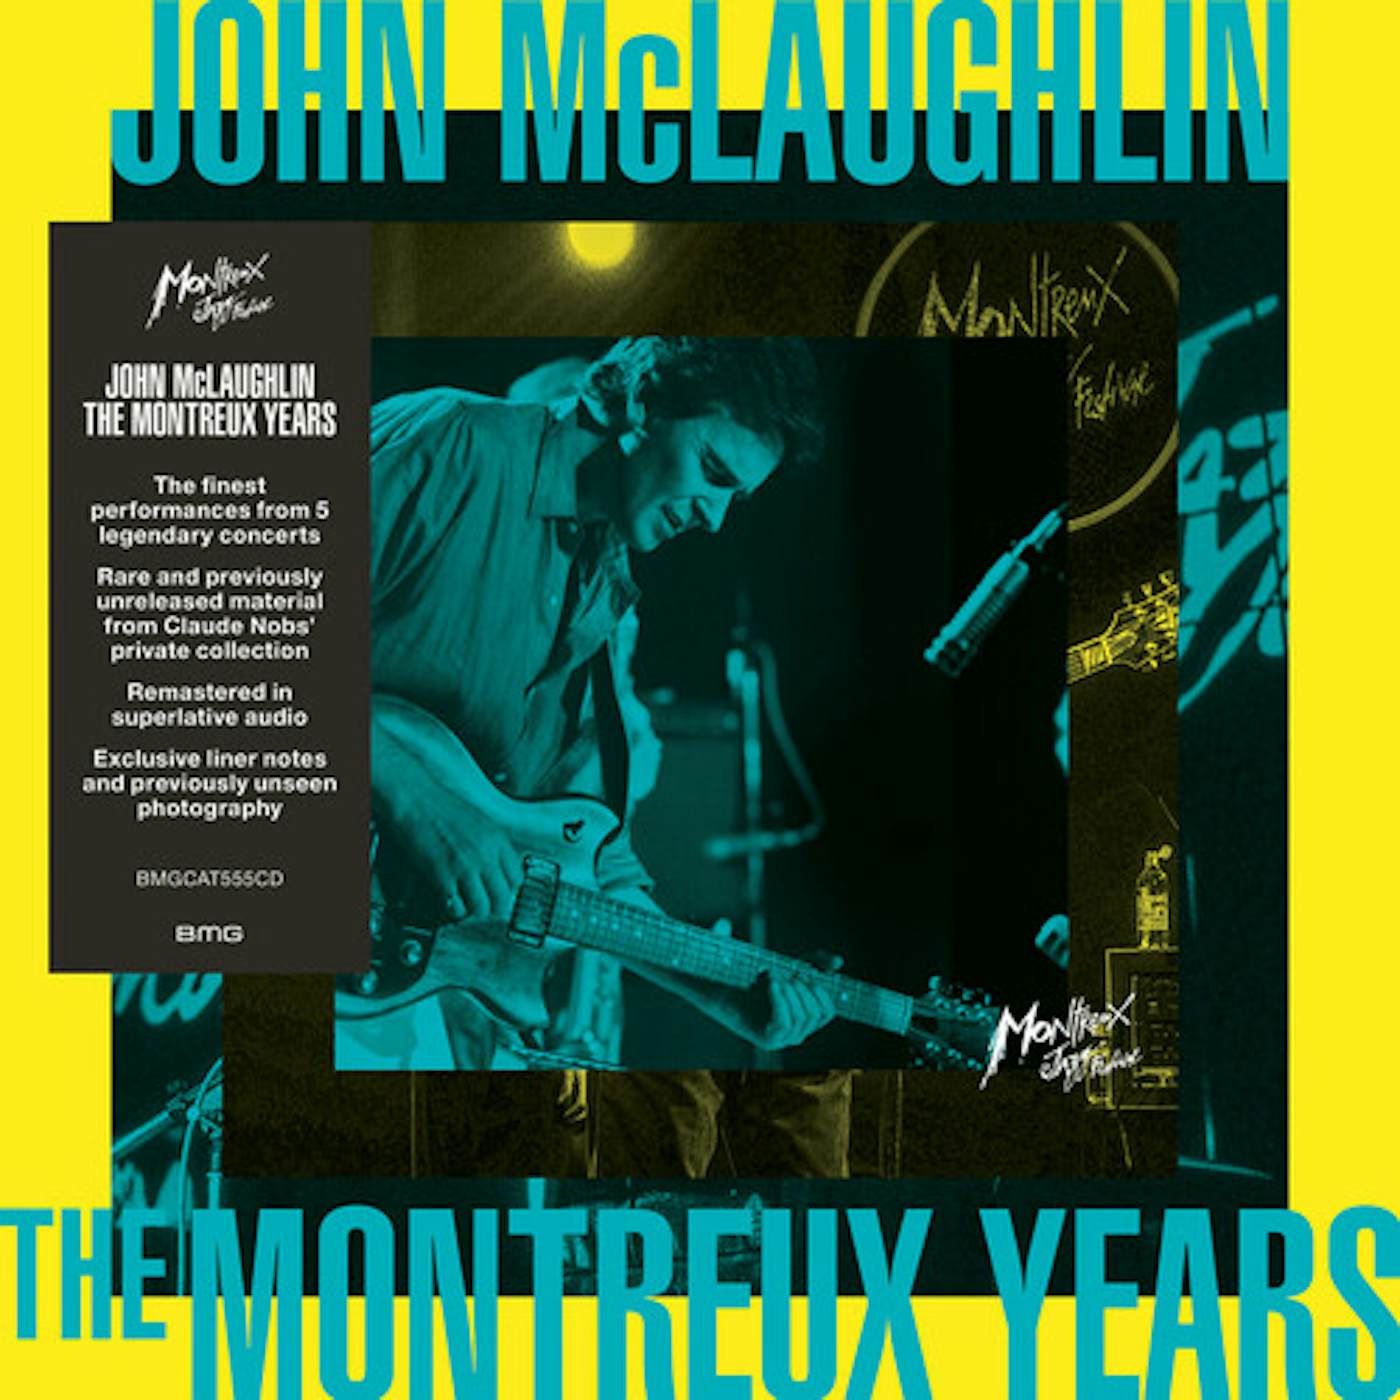 JOHN MCLAUGHLIN: THE MONTREUX YEARS CD